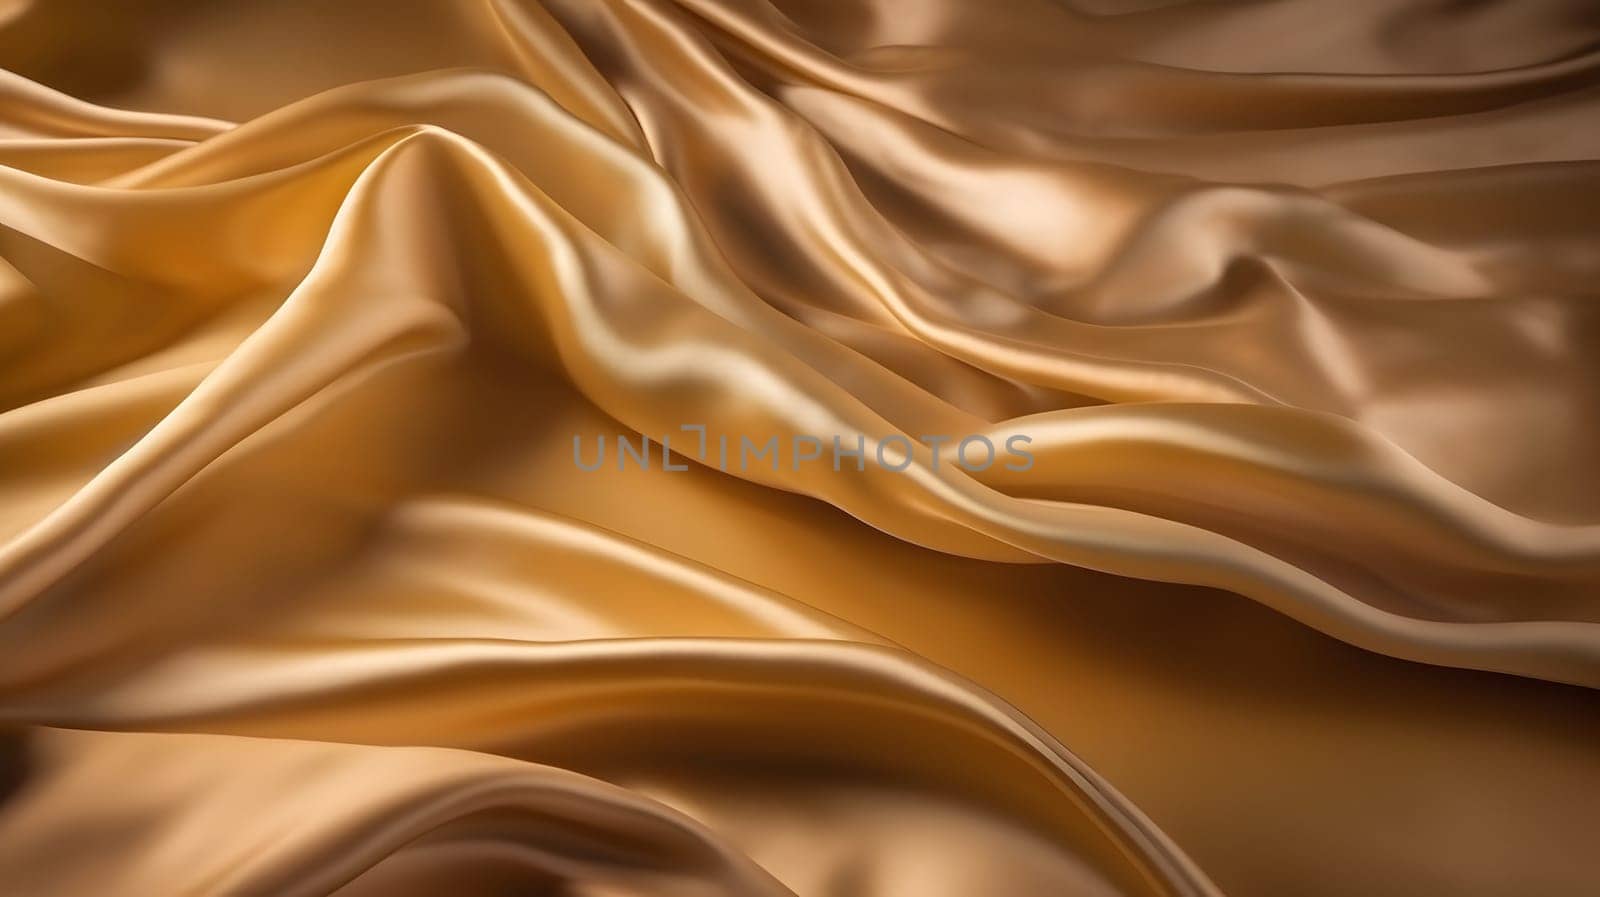 Golden-colored silk surface with folds. Abstract background. Neural network generated in May 2023. Not based on any actual scene or pattern.